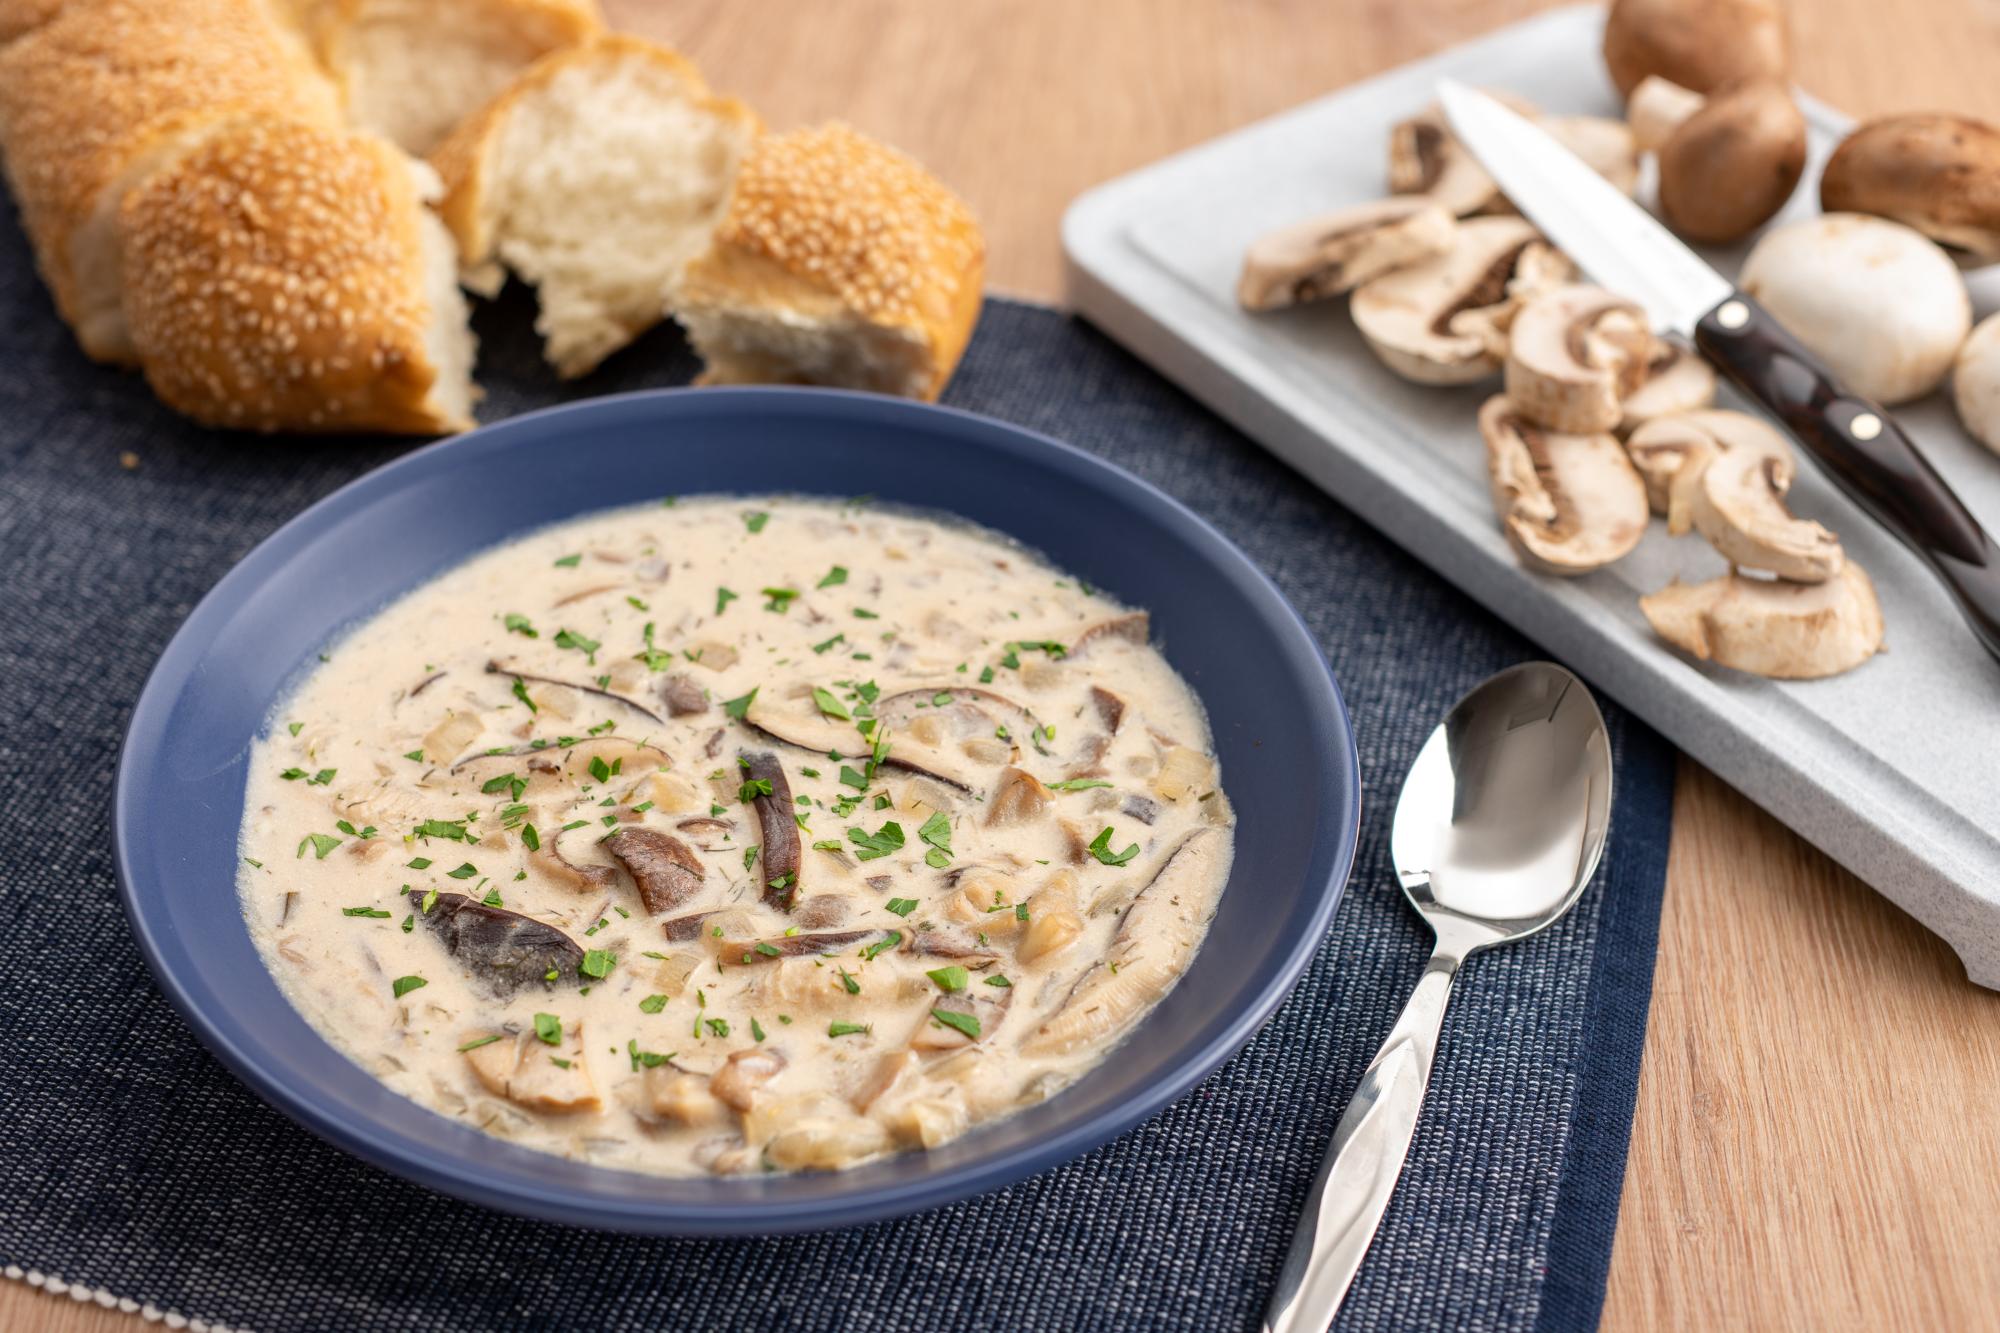 Creamy and Flavorful Mushroom Soup